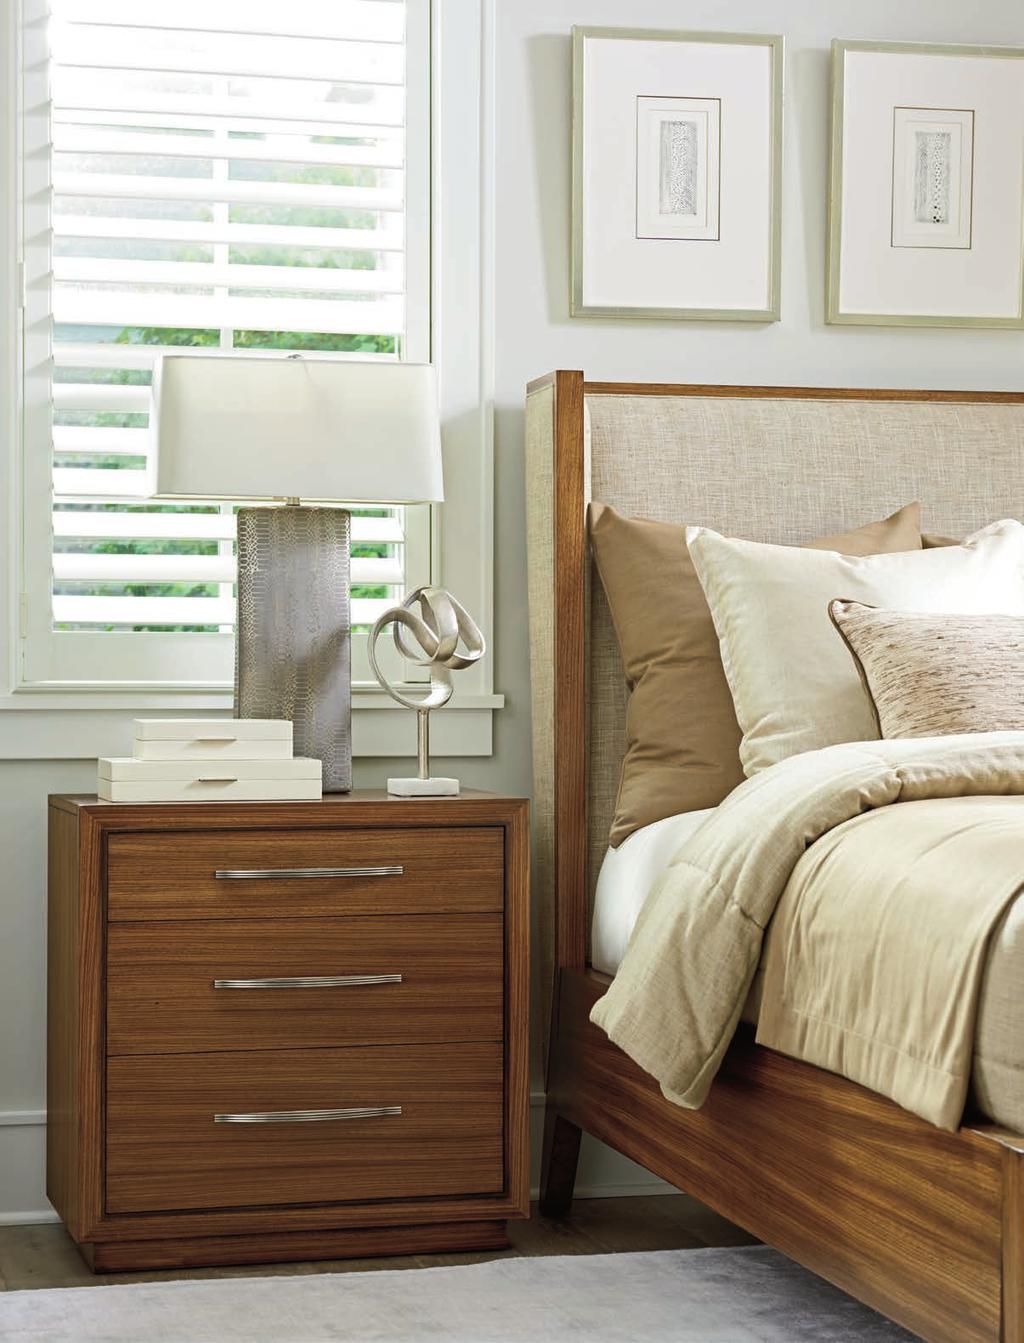 In order to accommodate a variety of design scenarios, Kitano offers three configurations of nightstands.